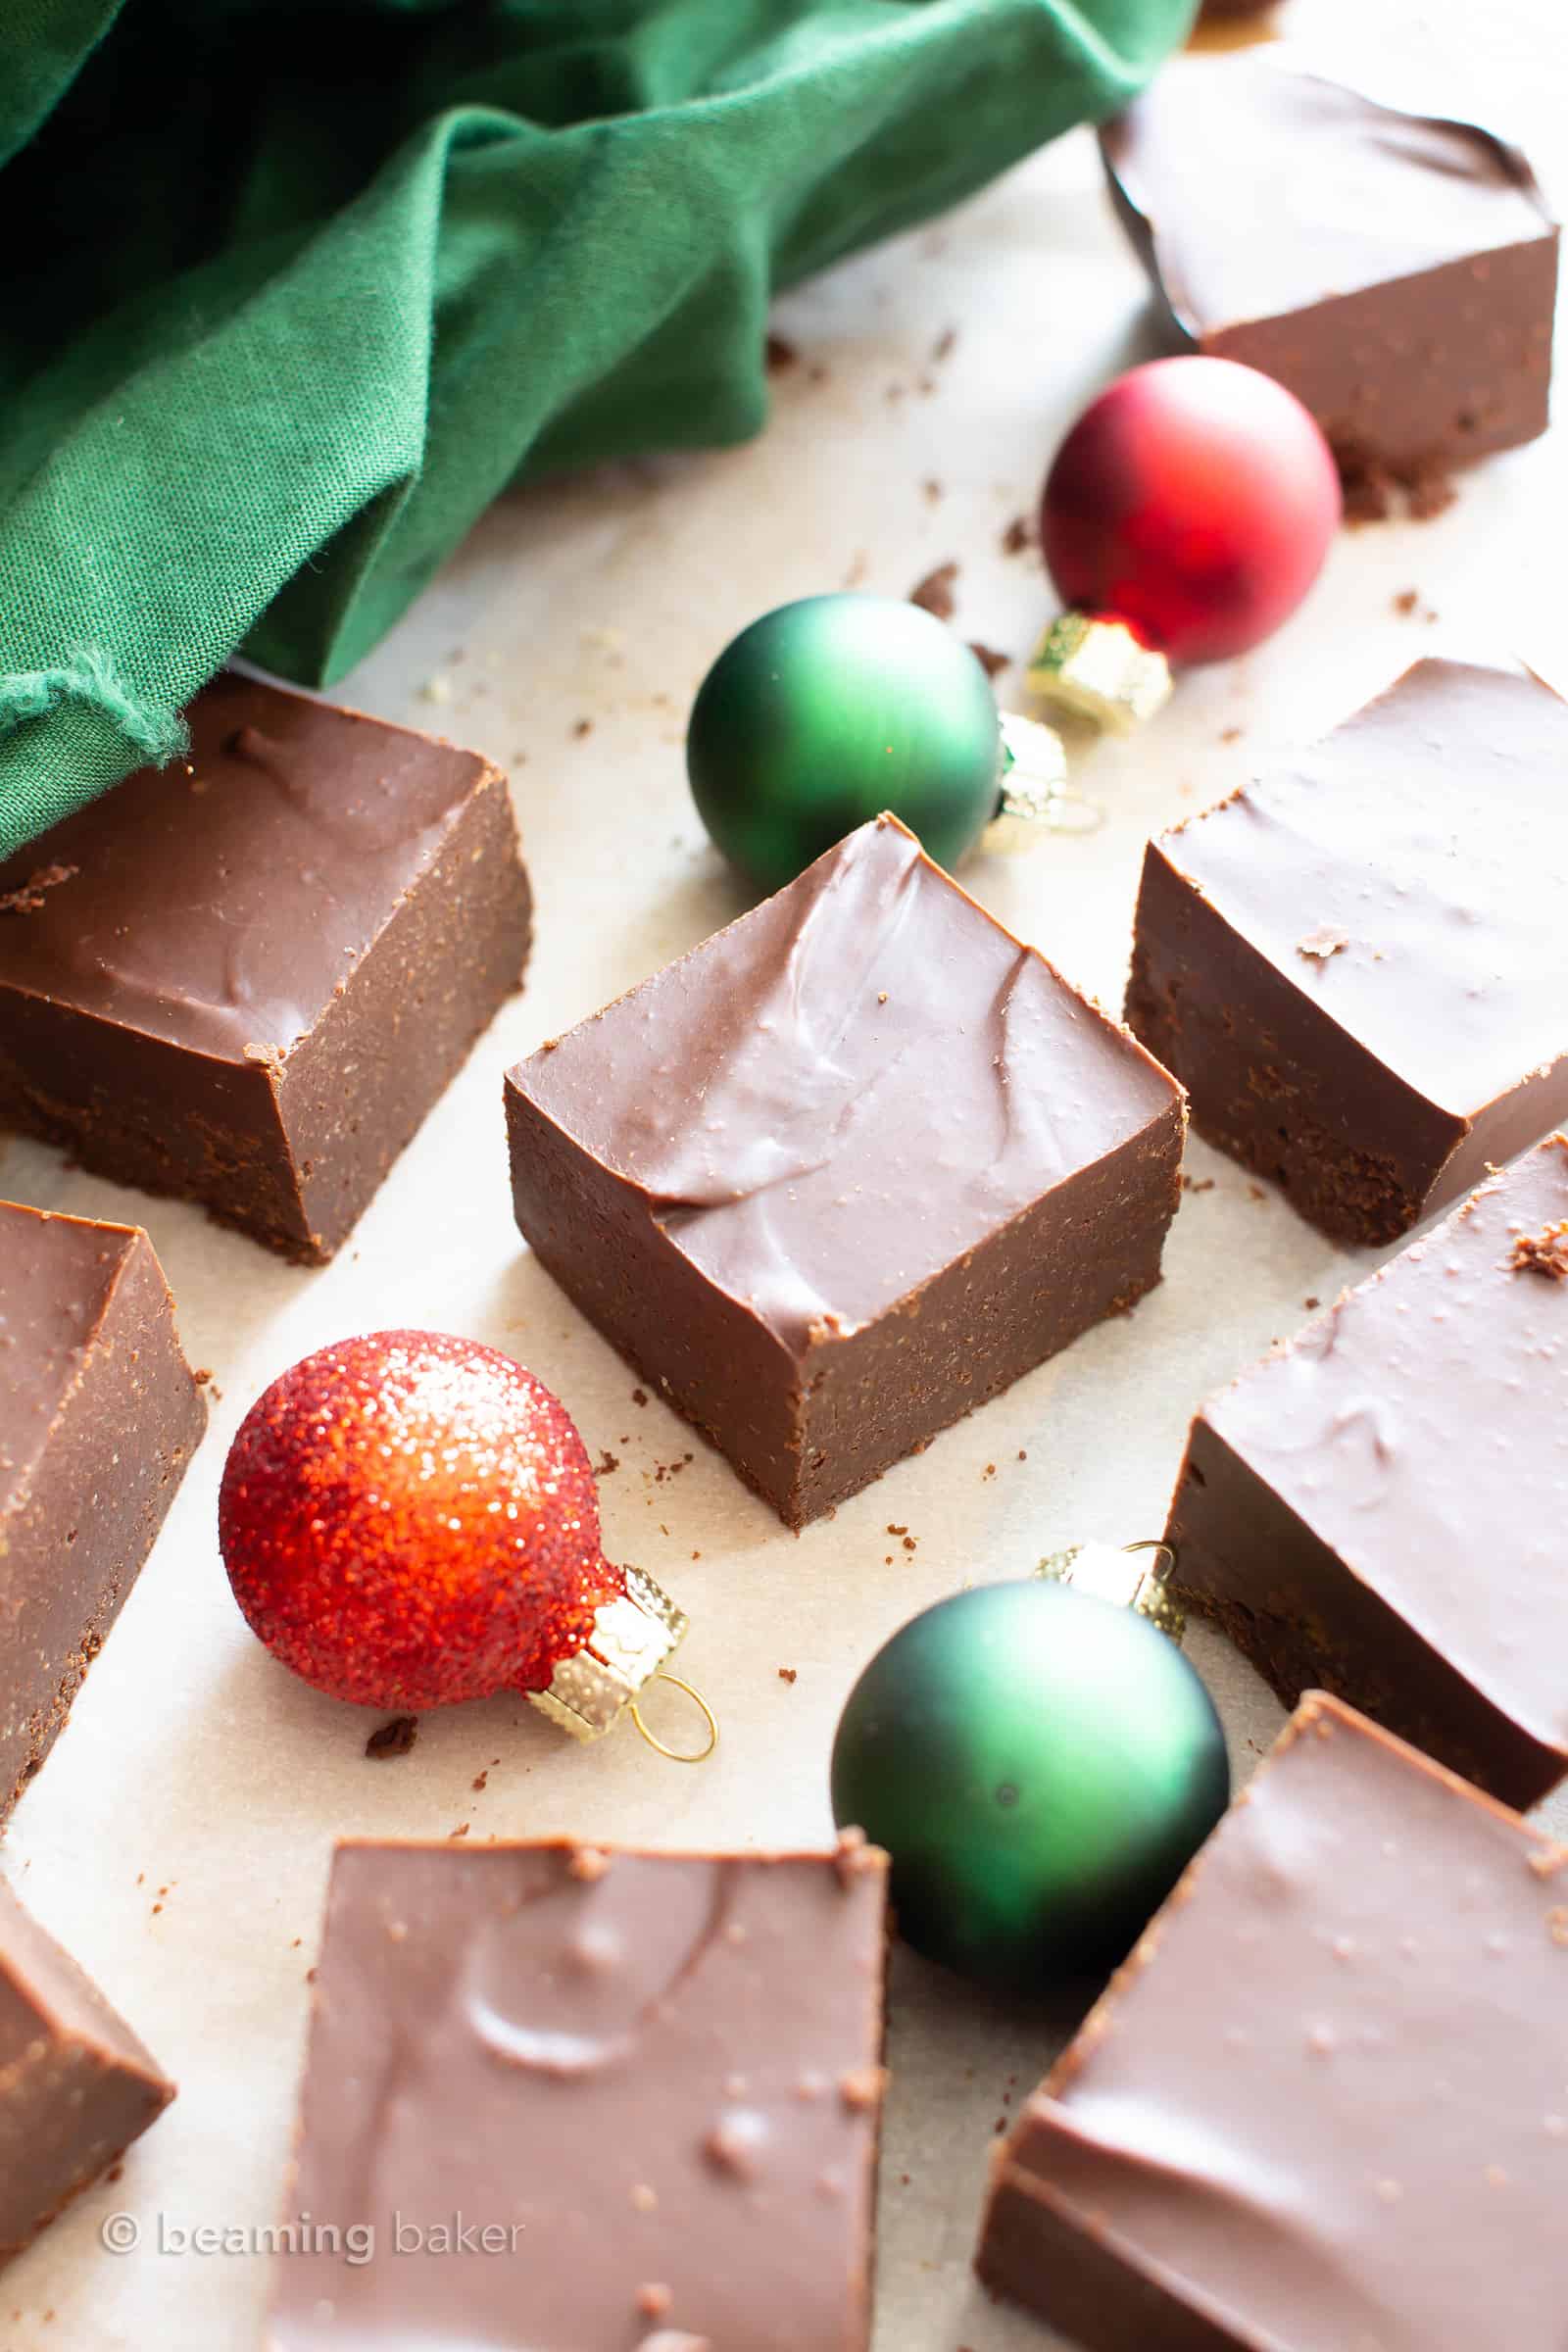 3 Ingredient Low Carb Peppermint Chocolate Fudge: this super easy keto chocolate fudge recipe is perfect for the holidays! Cool, minty & indulgent—the best keto peppermint fudge: Sugar Free, Low Carb, Vegan. #Keto #LowCarb #Fudge #Christmas #SugarFree | Recipe at BeamingBaker.com